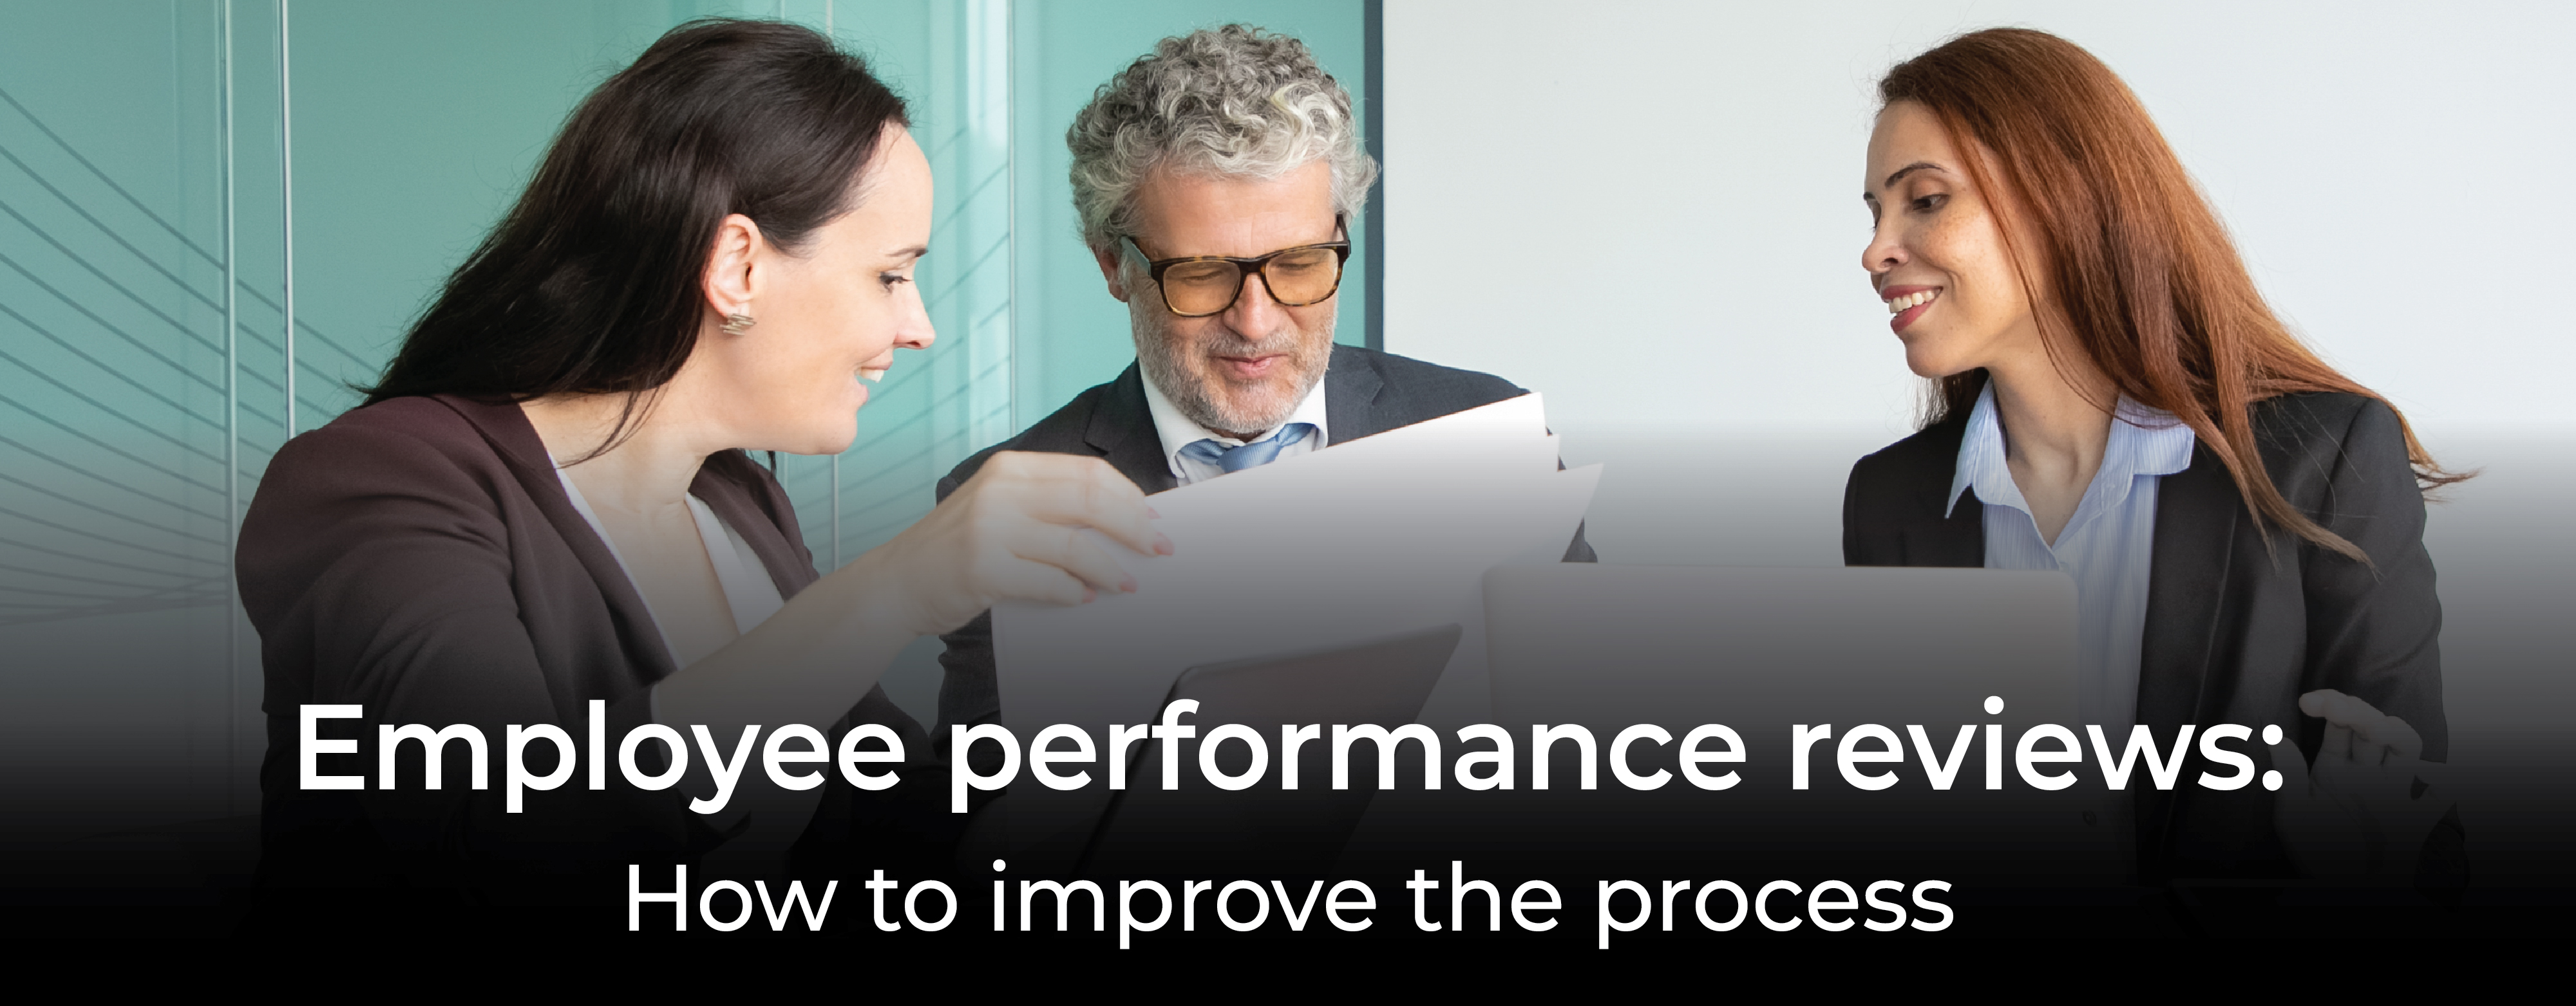 Employee performance reviews: How to improve the process